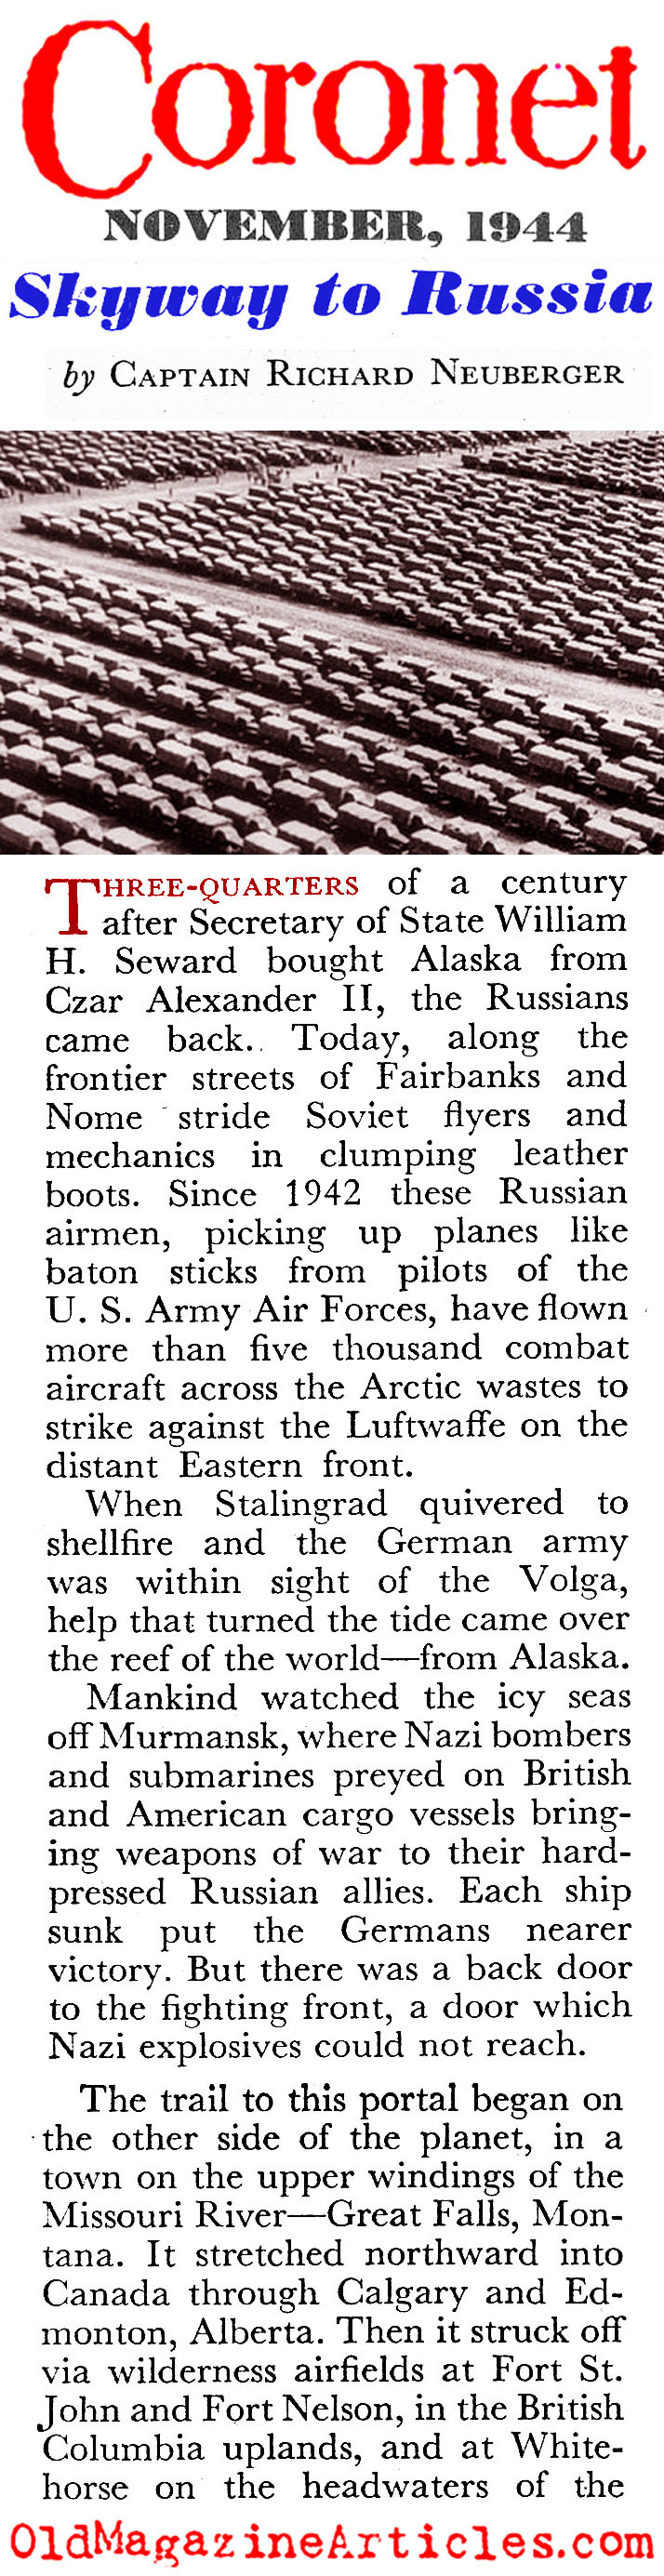 Lend-Lease for the Eastern Front (Coronet Magazine, 1944) 